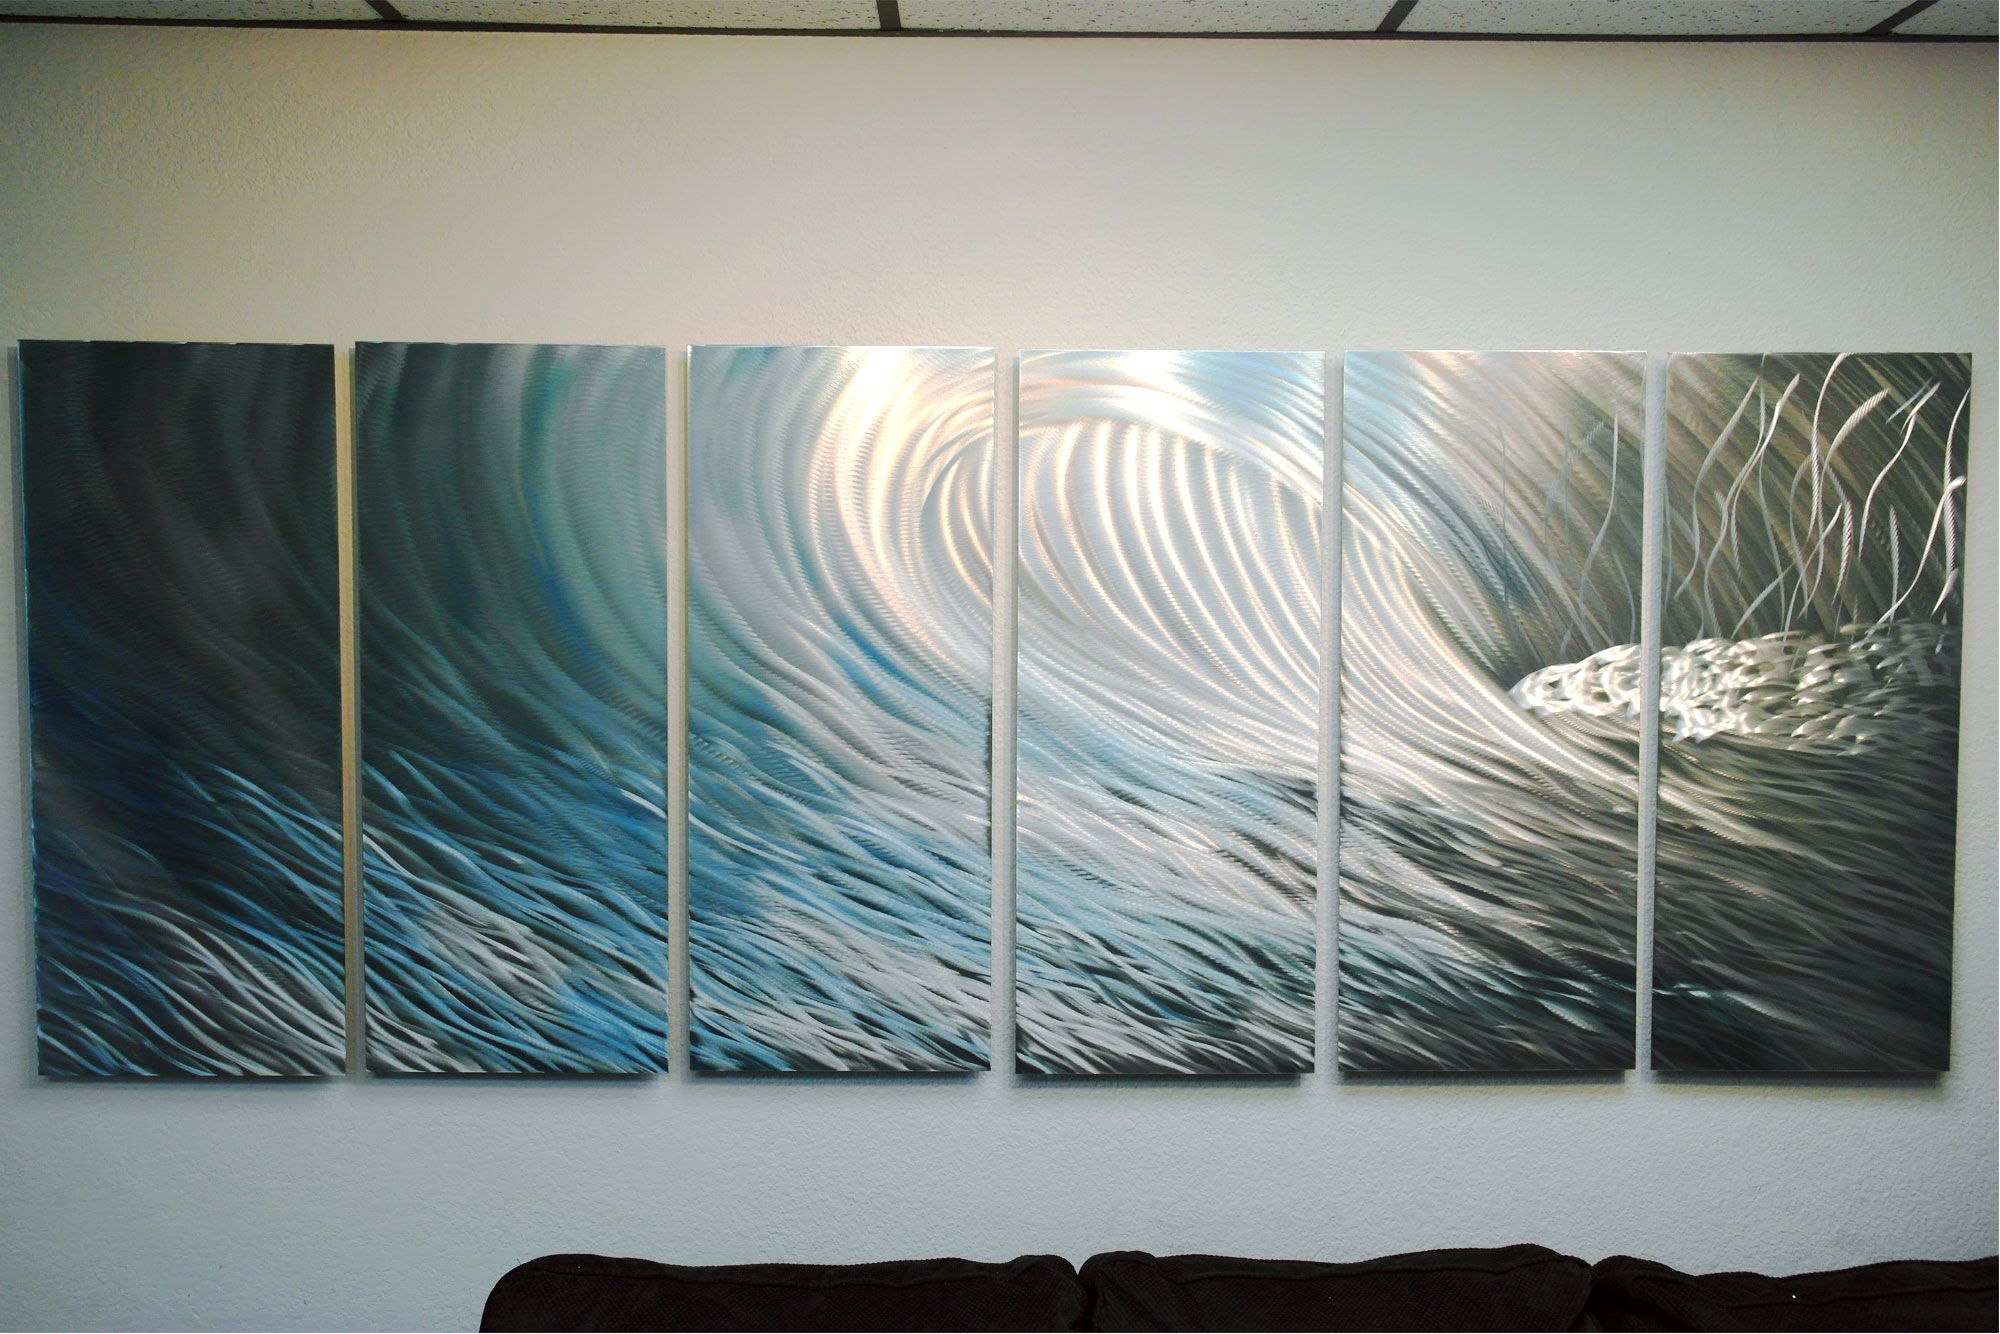 Favorite Wave 36x96 – Abstract Metal Wall Art Contemporary Modern Pertaining To Wave Wall Art (View 9 of 20)